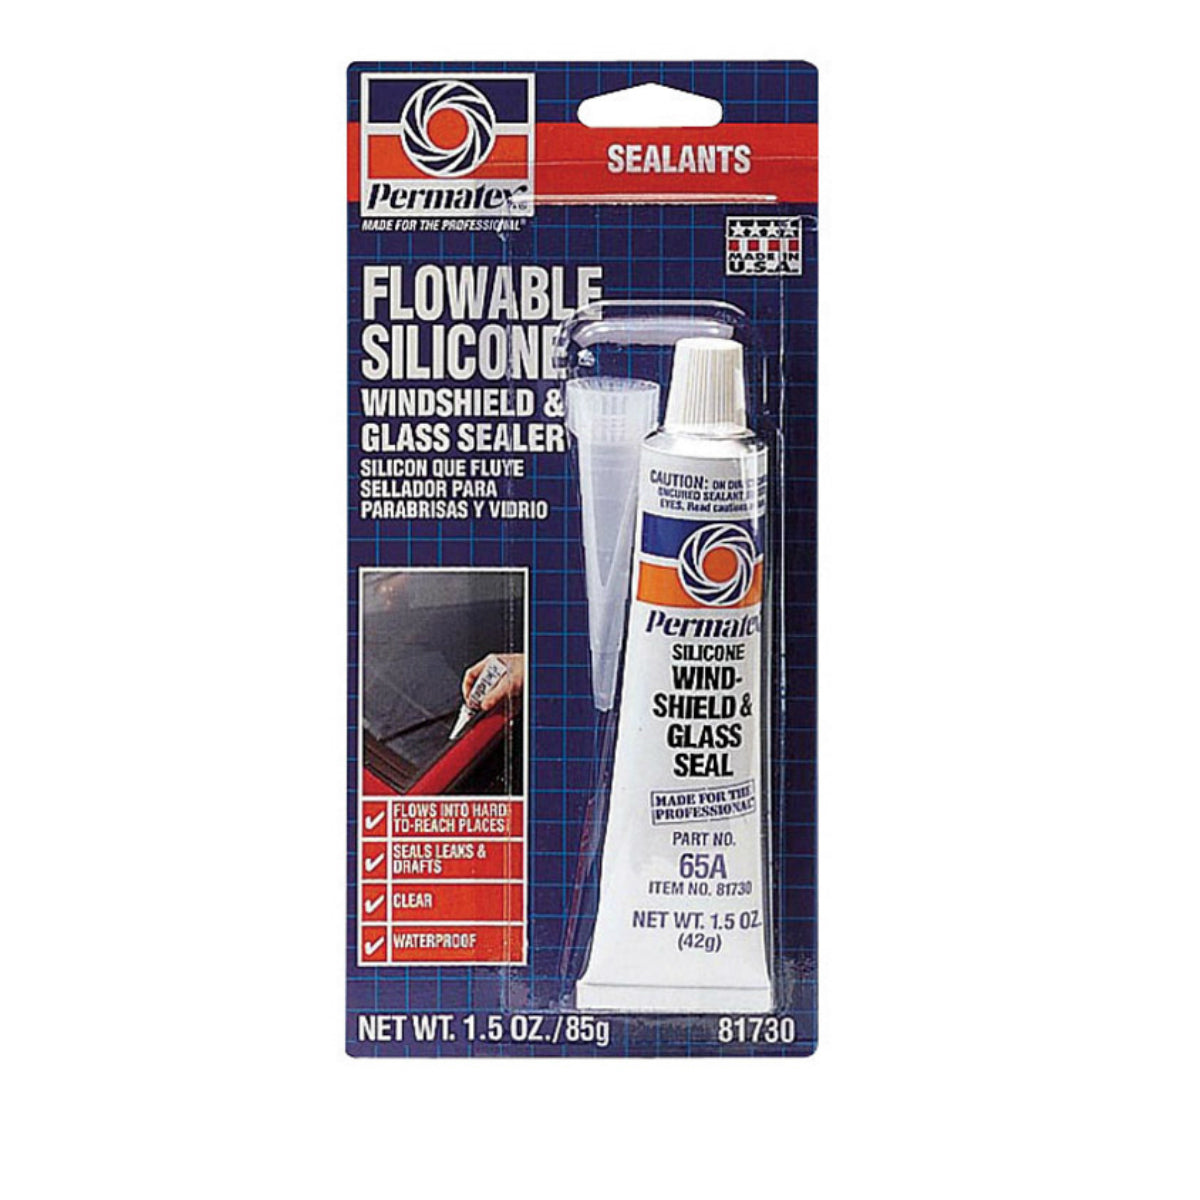 Buy permatex 81730 flowable silicone windshield and glass sealer, 1.5 oz. - Online store for lubricants, fluids & filters, gasket in USA, on sale, low price, discount deals, coupon code